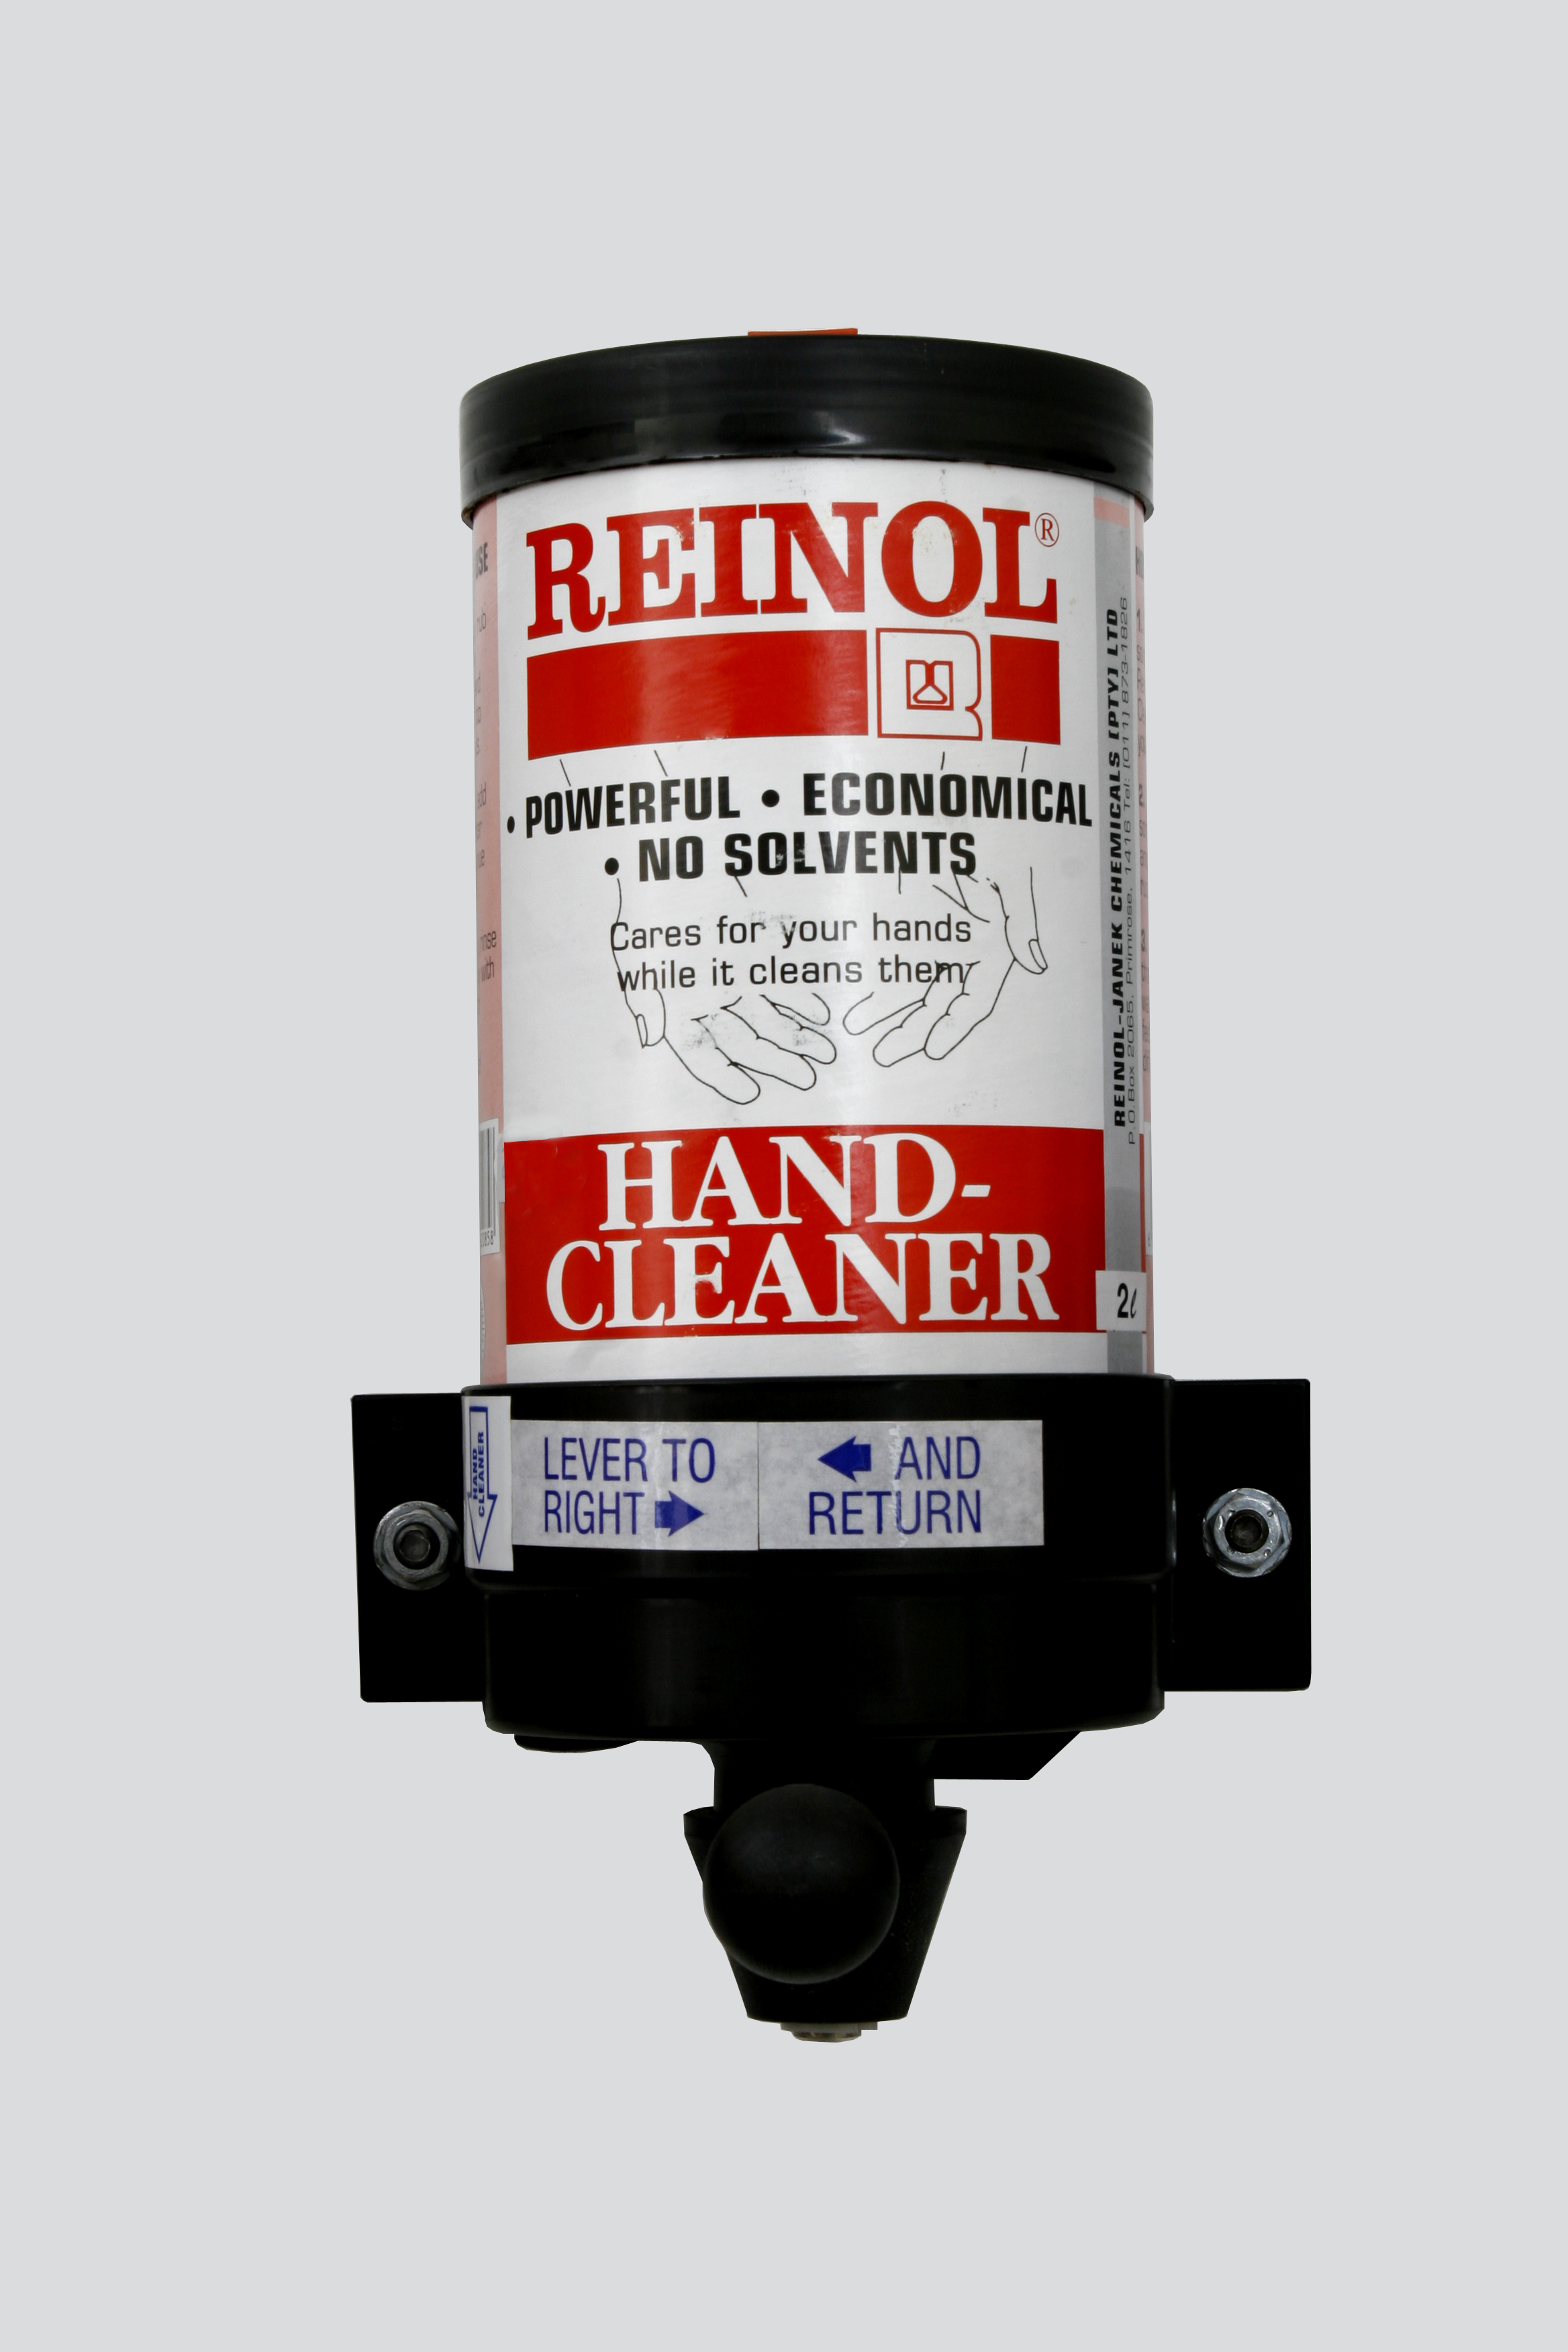 Here is Reinol’s soap dispenser, which provides users with the exact amount of soap needed to clean their hands. Consumers can purchase Reinol Original Hand Cleaner on Amazon and Walmart.com. 

